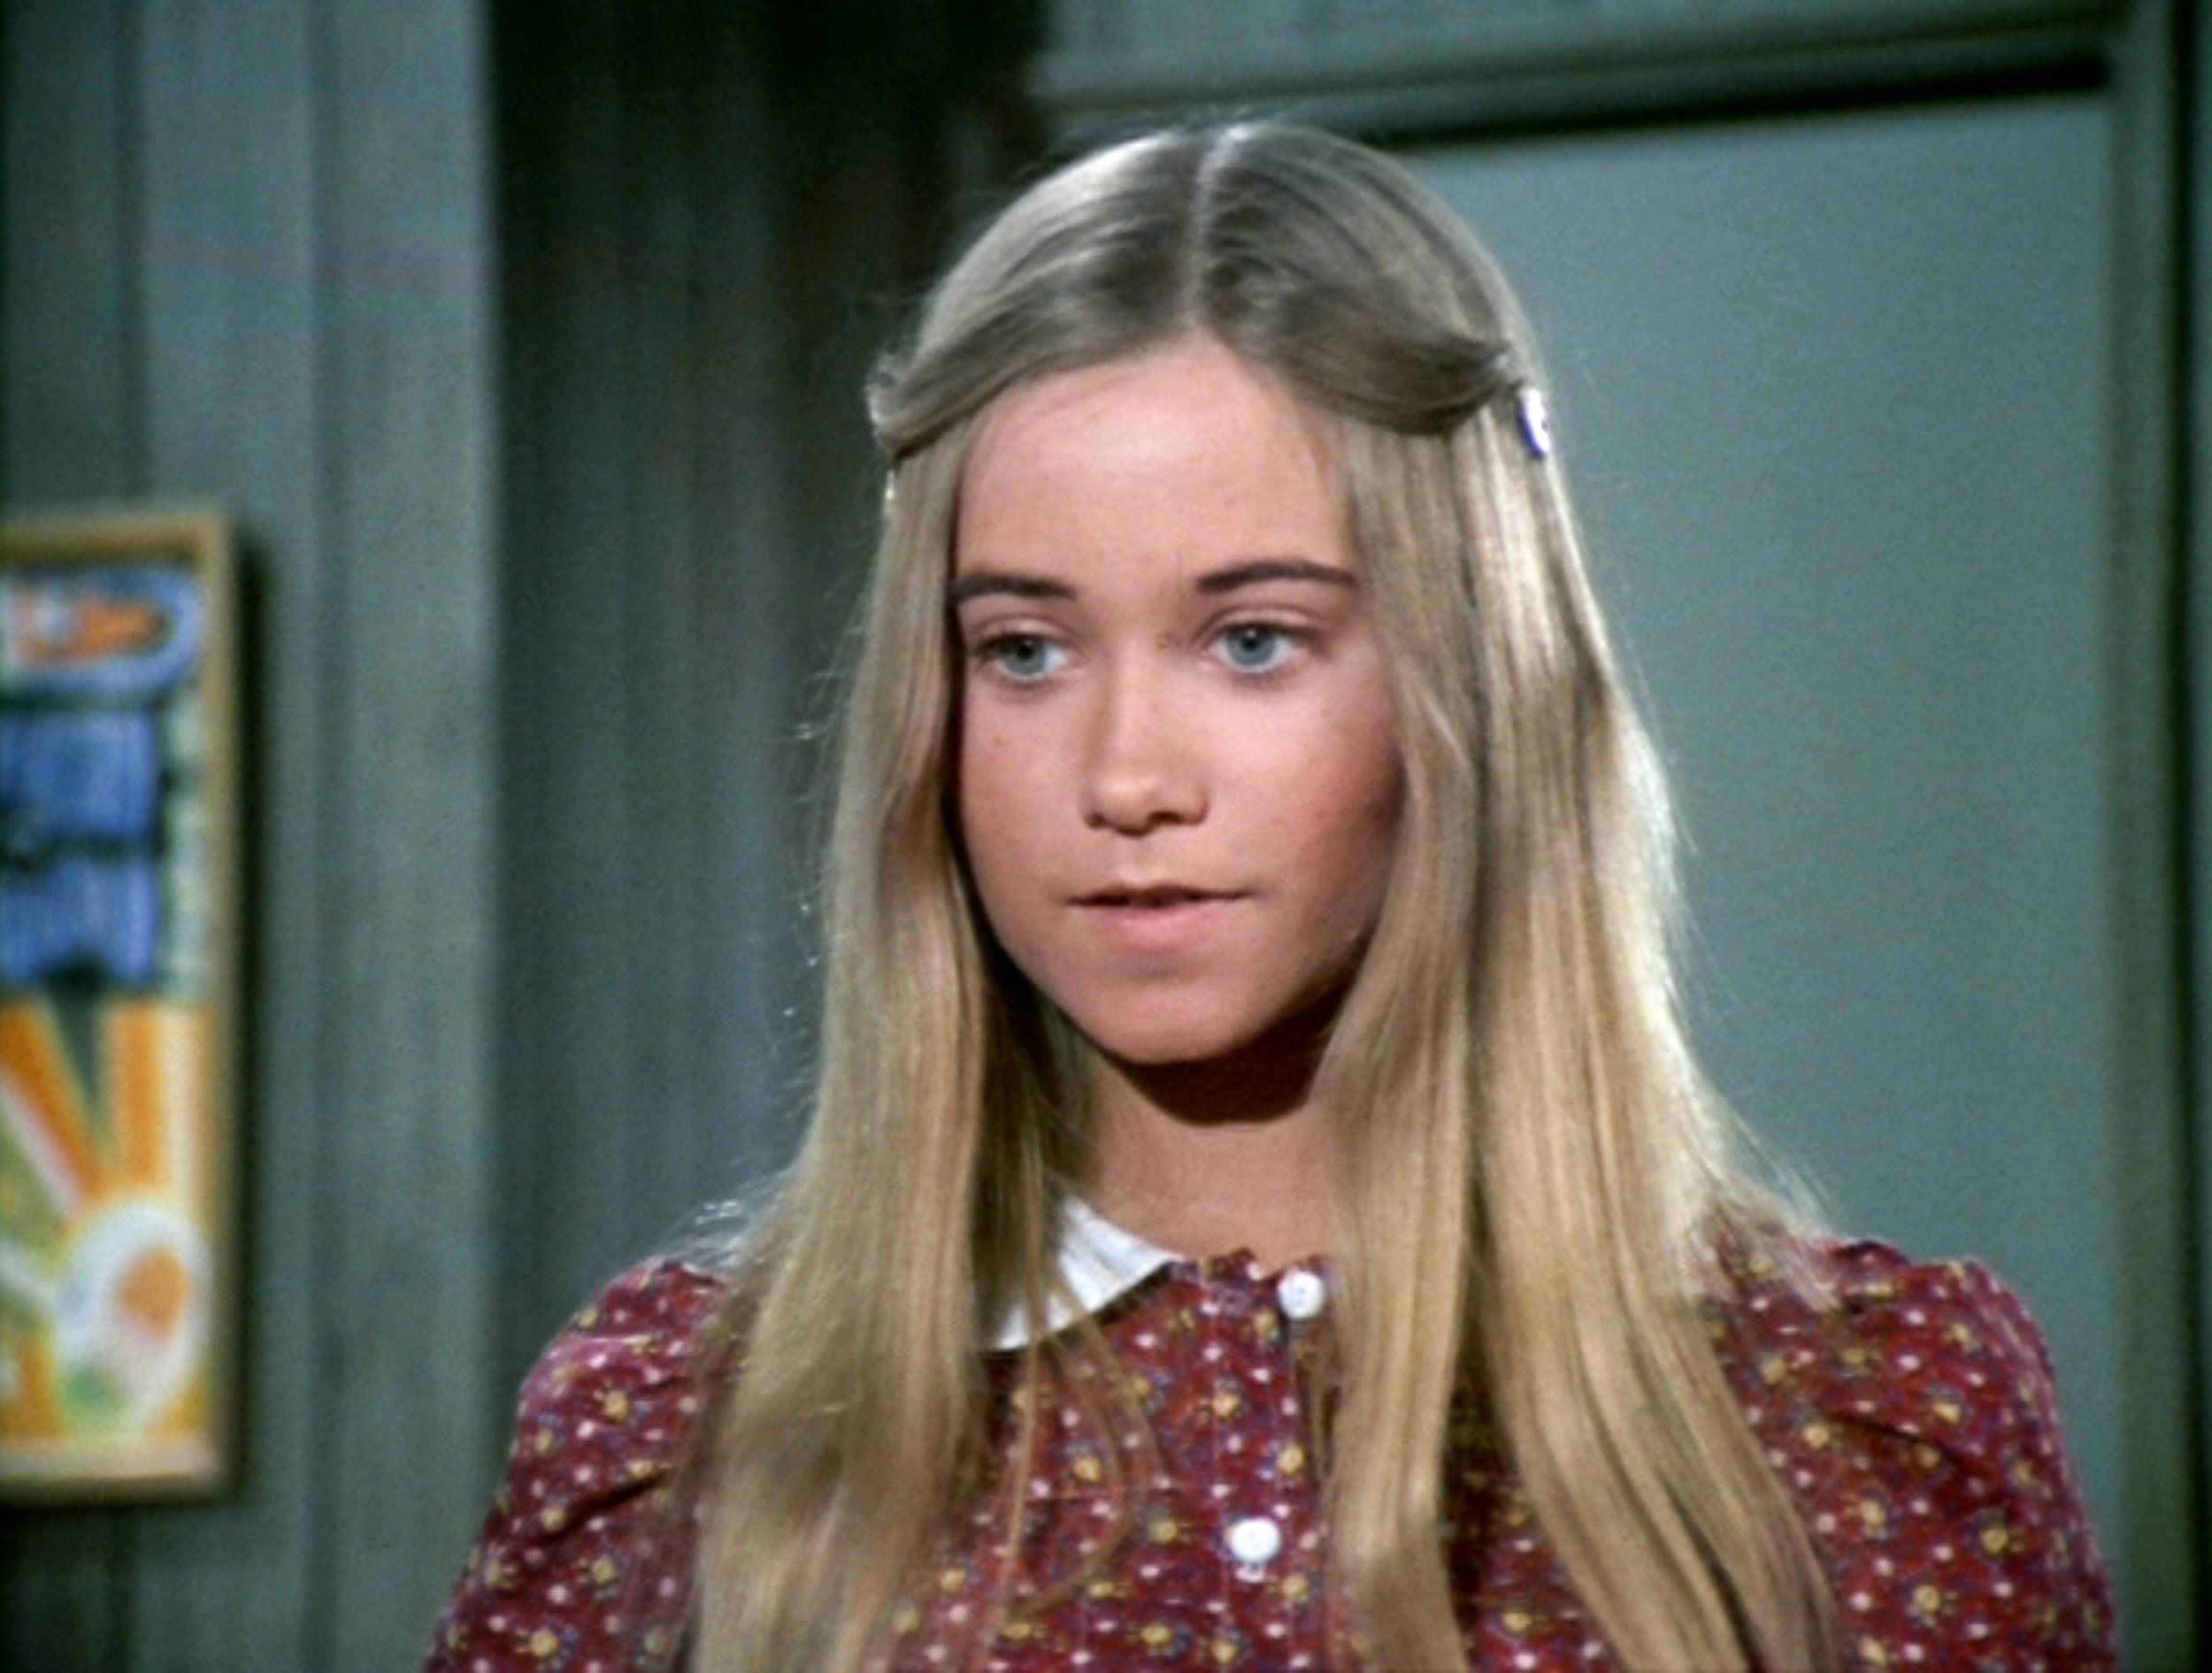 Maureen McCormick as Marcia Brady in the BRADY BUNCH episode, "The Subject Was Noses." Original air date, February 9, 1973. | Source: Getty Images